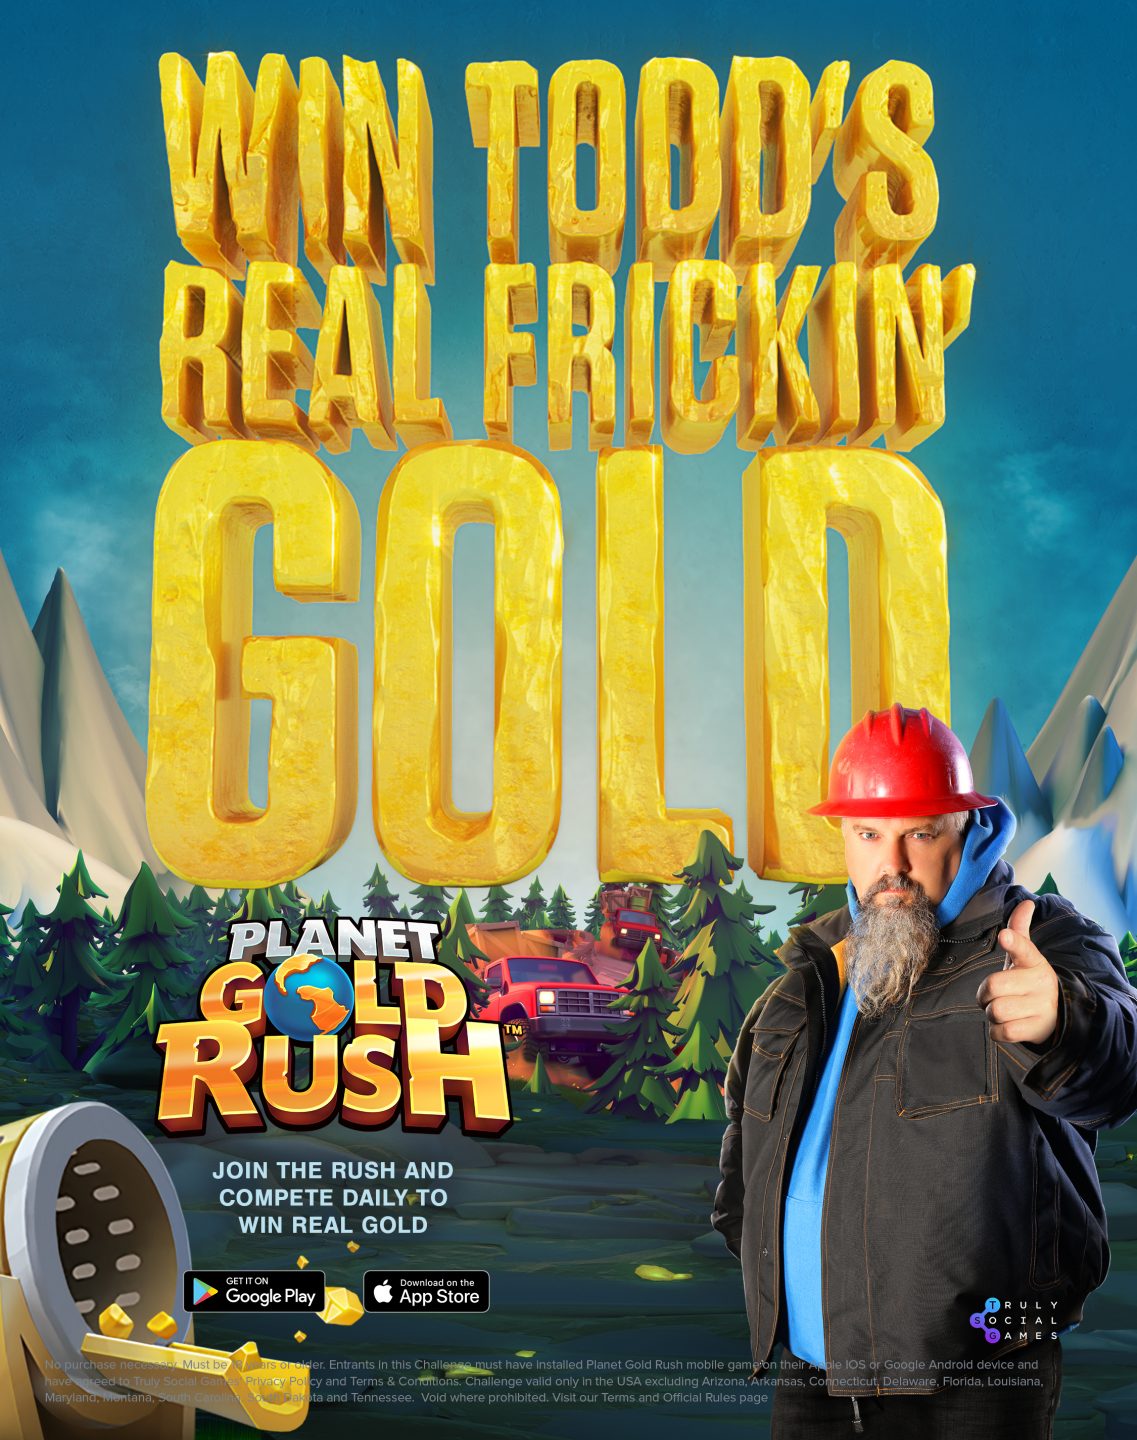 Planet Gold Rush poster (Truly Social Games)